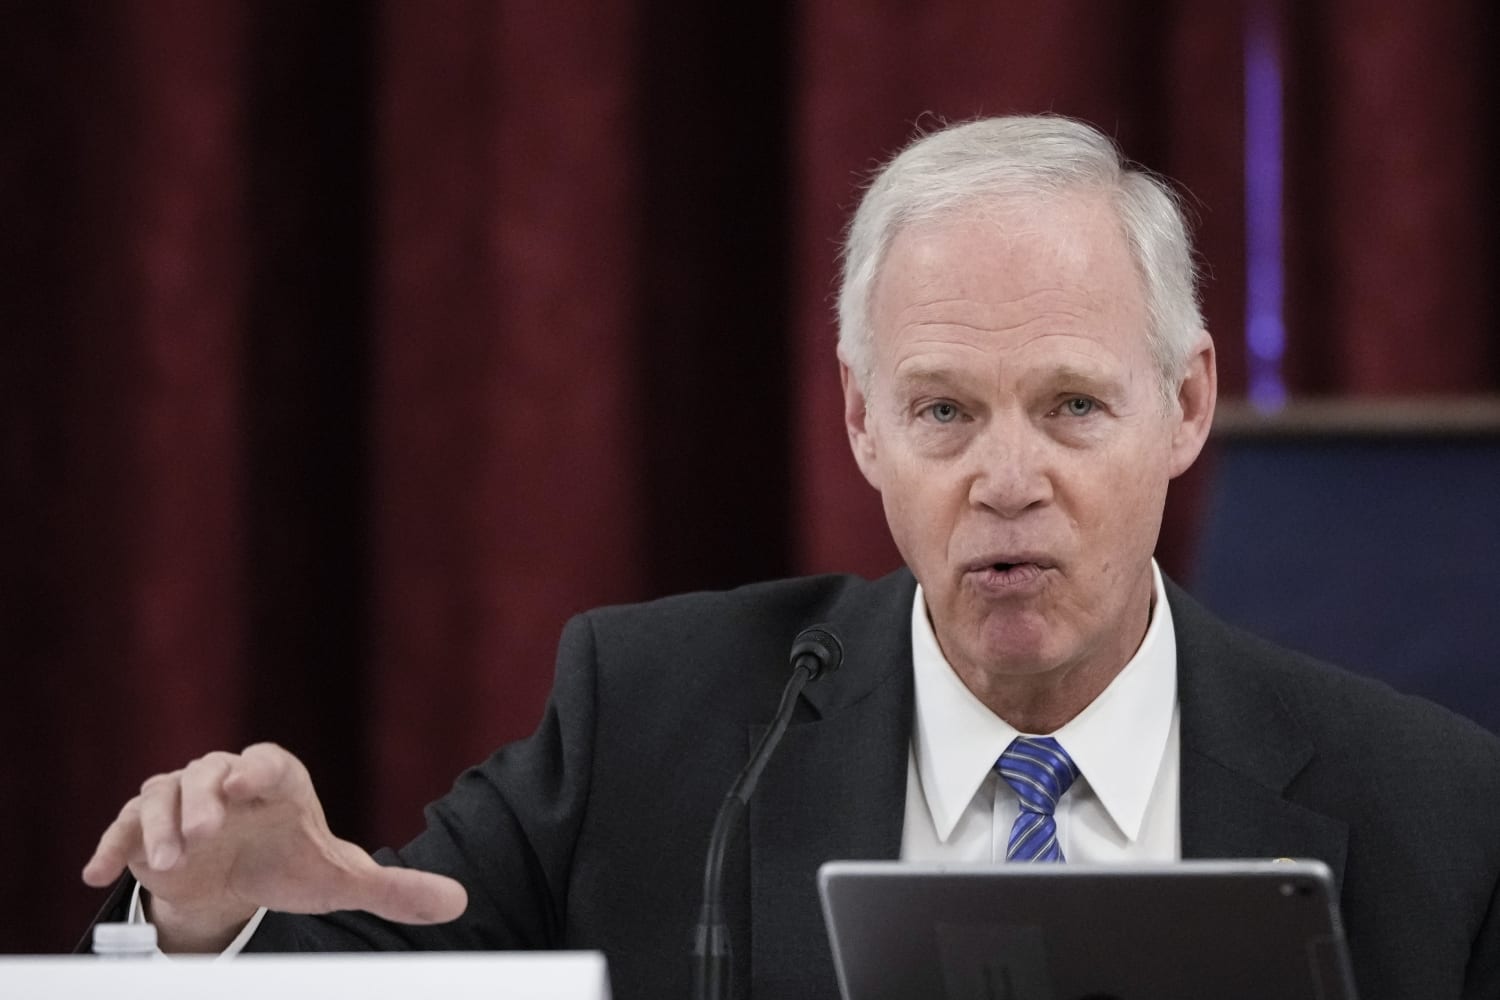 Ron Johnson uses an unusual line about jobs in his state thumbnail